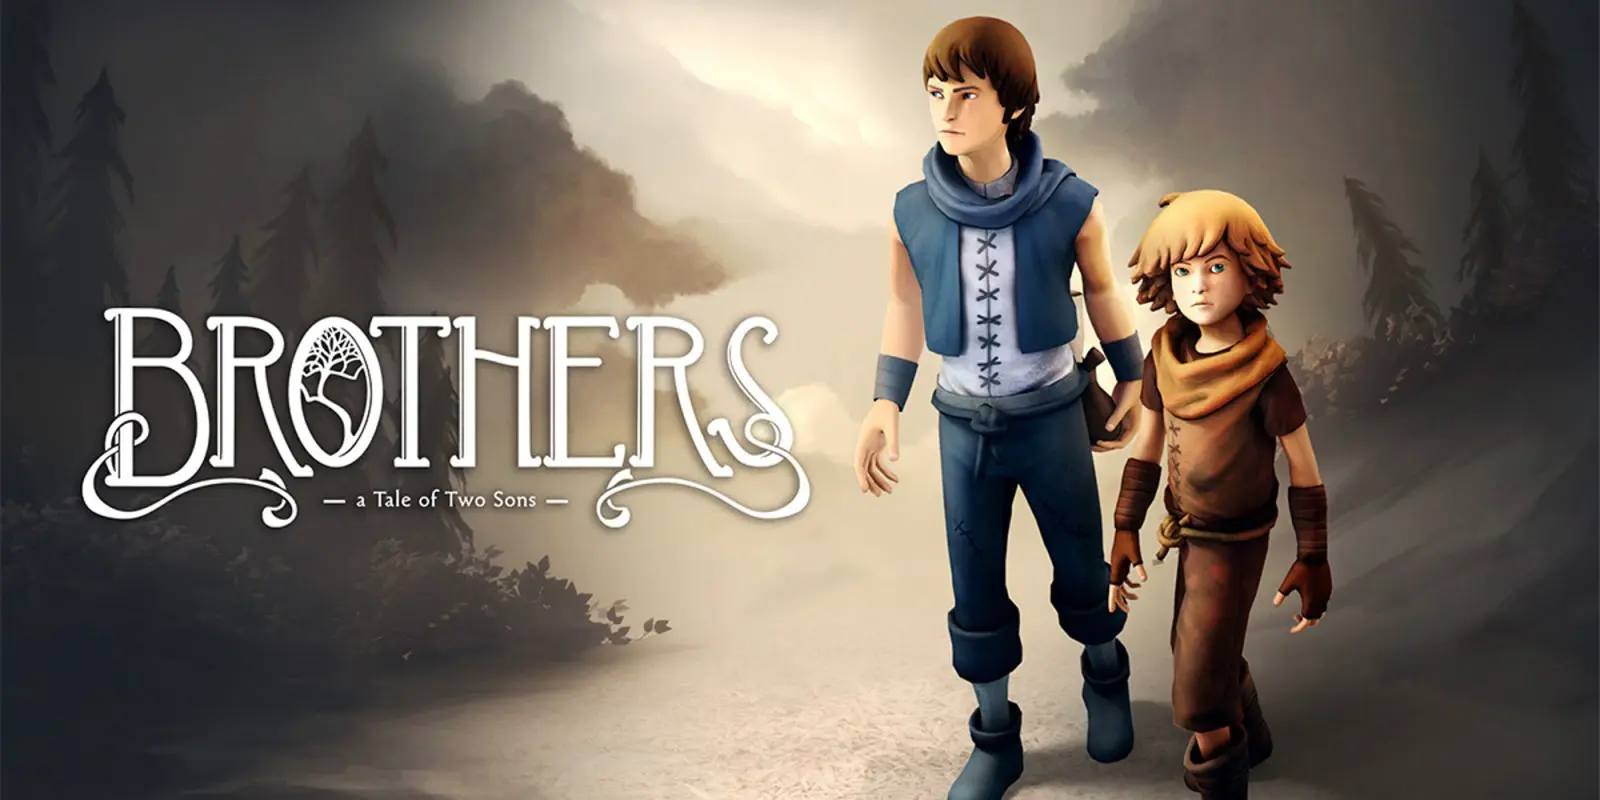 Brothers A tale of Two Sons remake annunciato